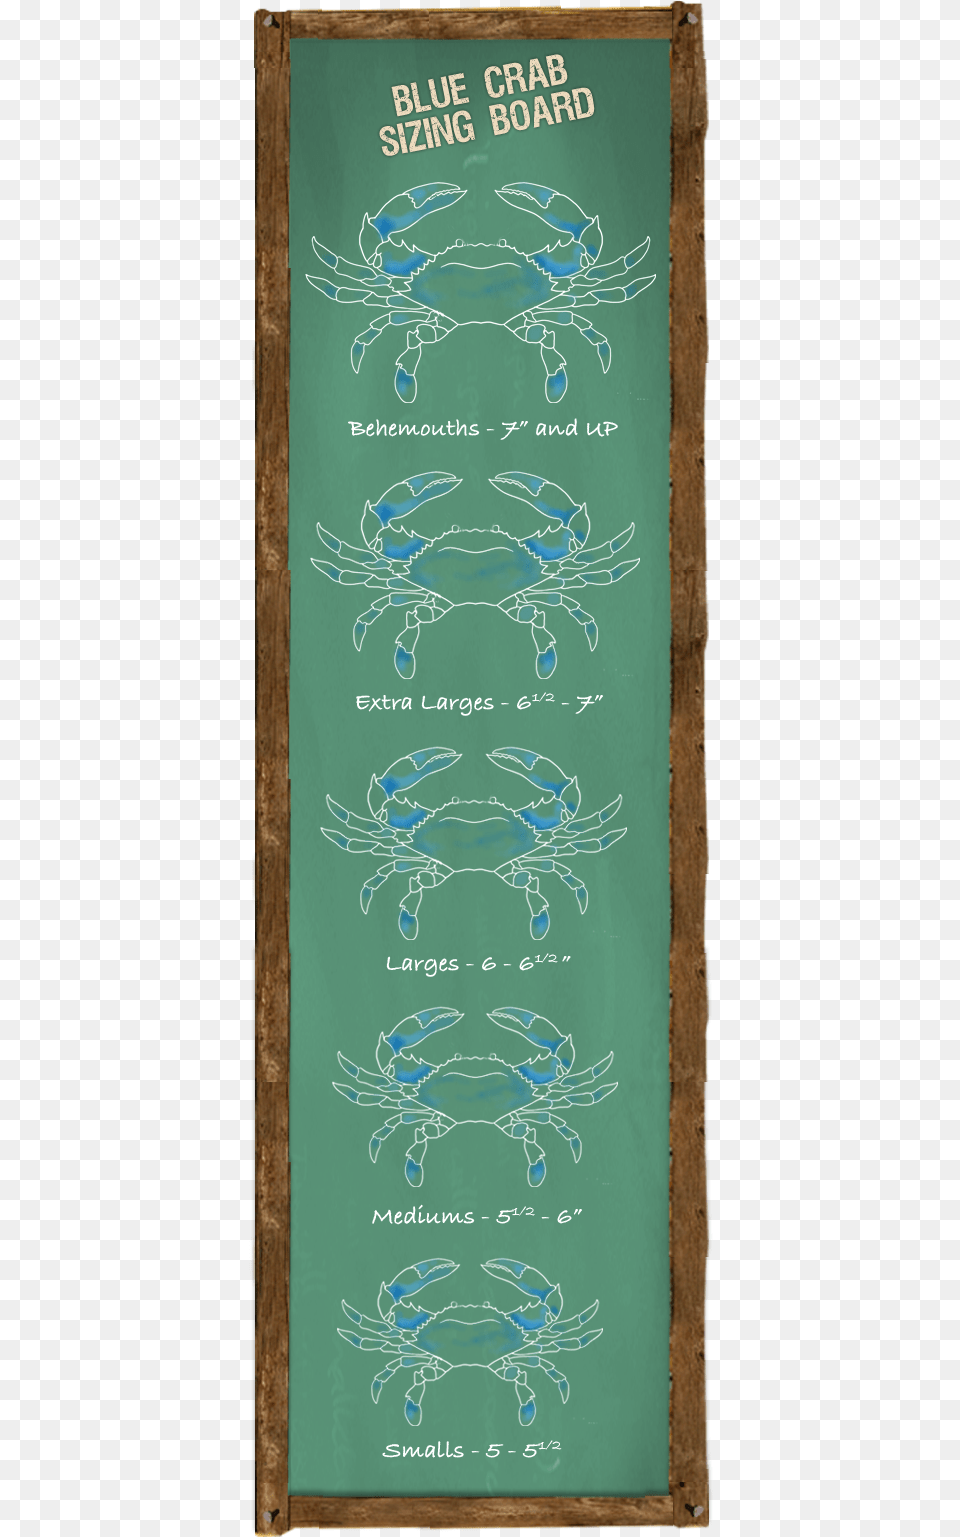 Blue Crab Sizing Board Crab Sizes Number, Blackboard, Text Free Png Download